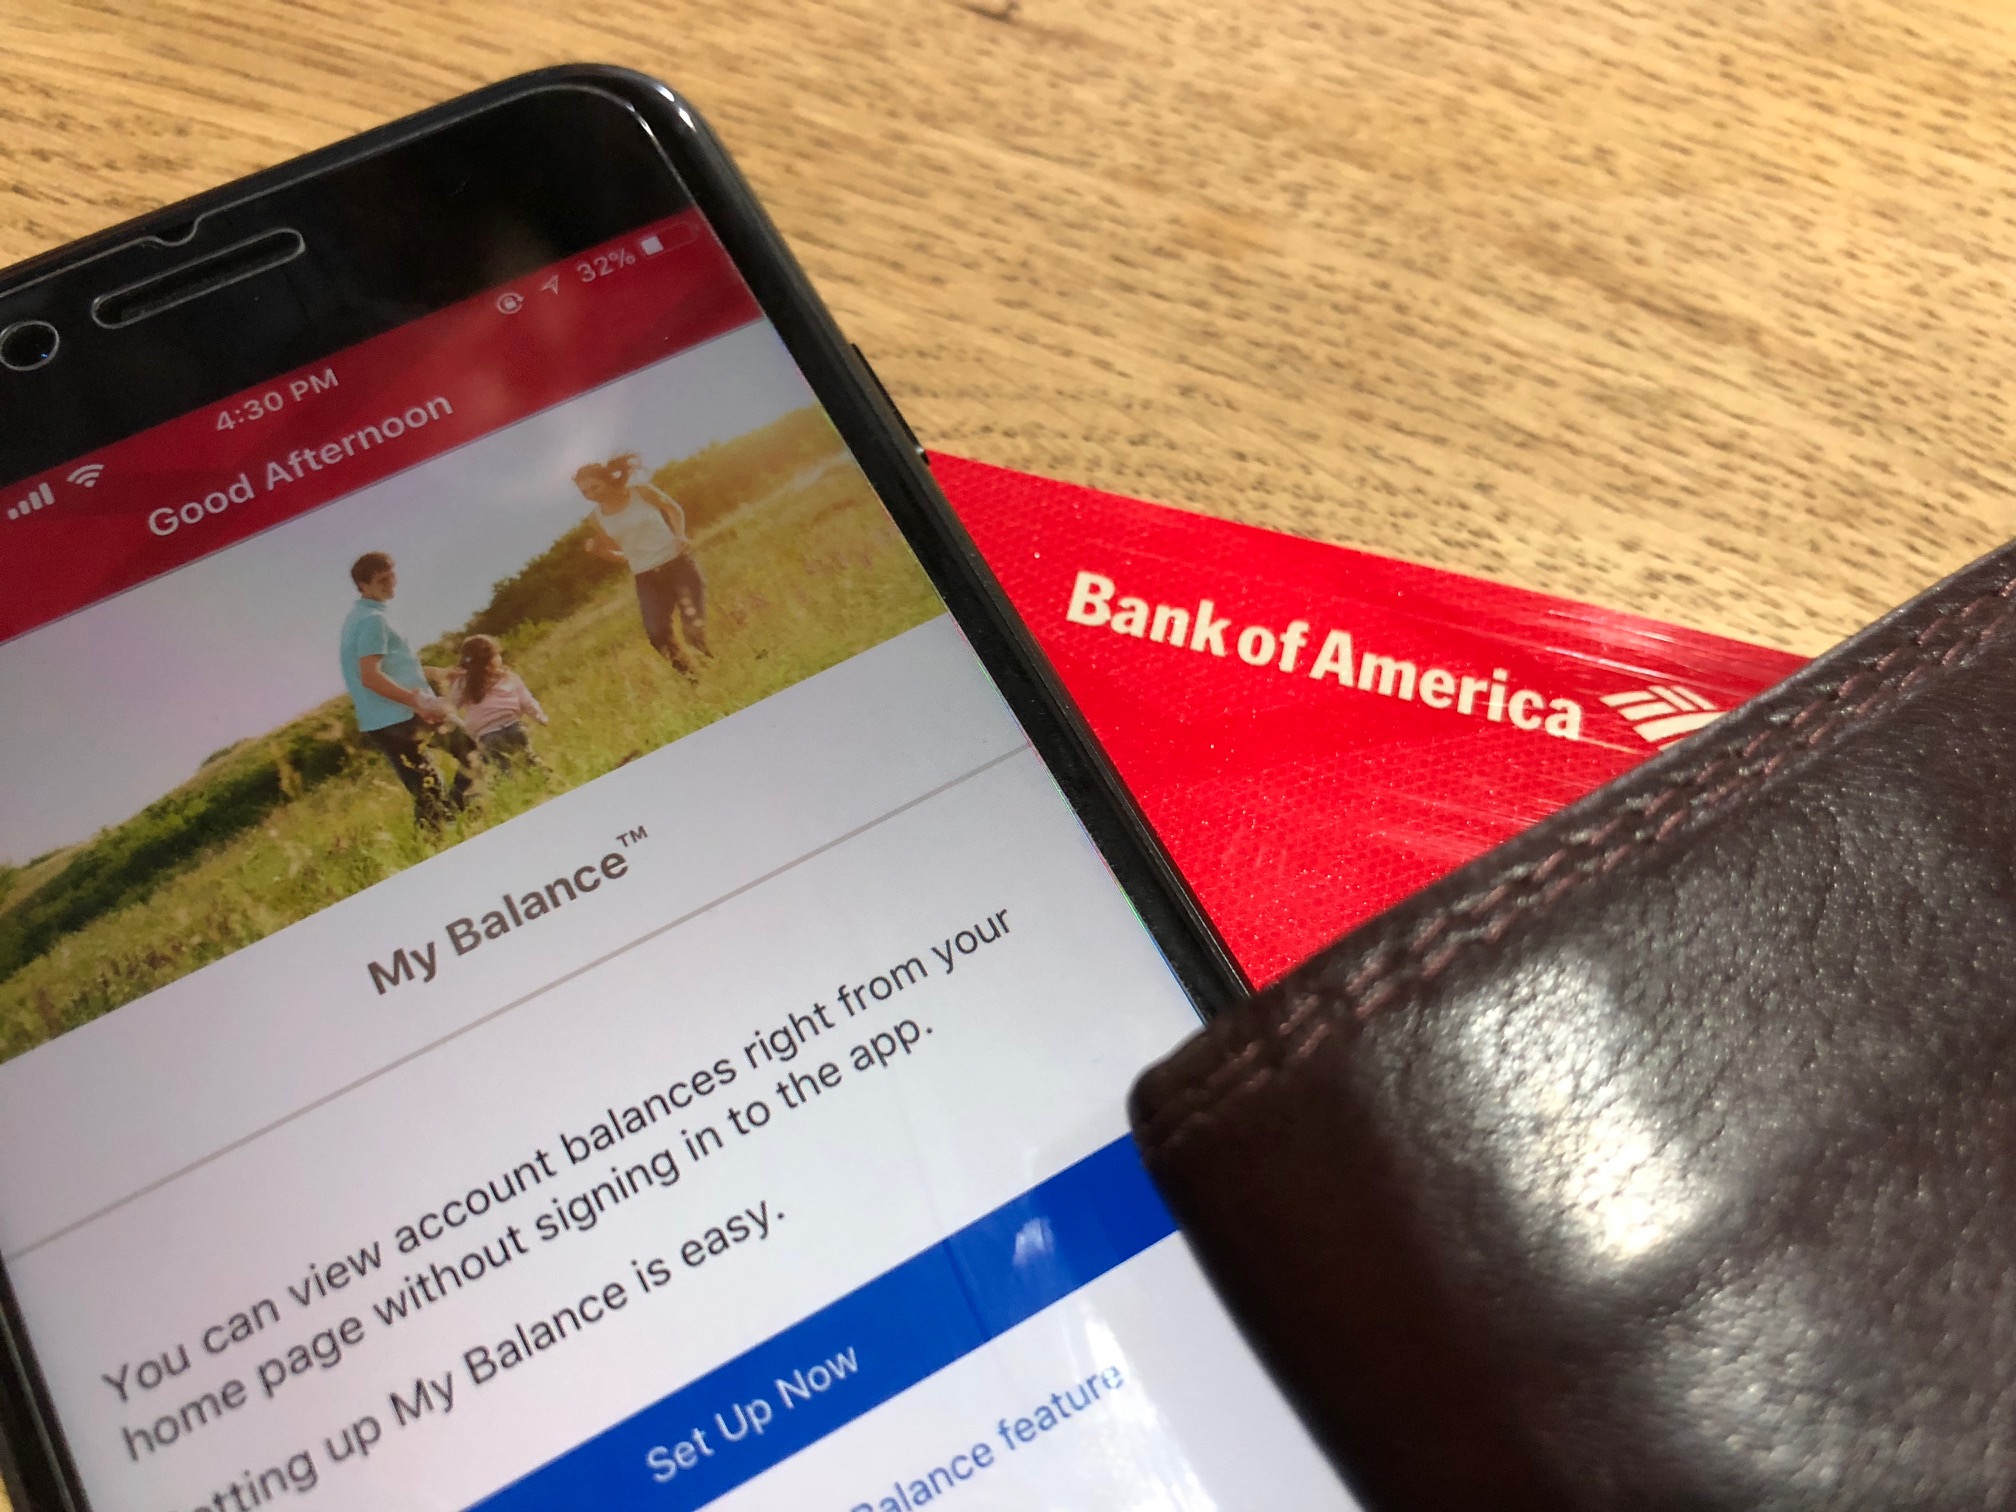 Learn How to Apply for a Bank of America Credit Card Using the App